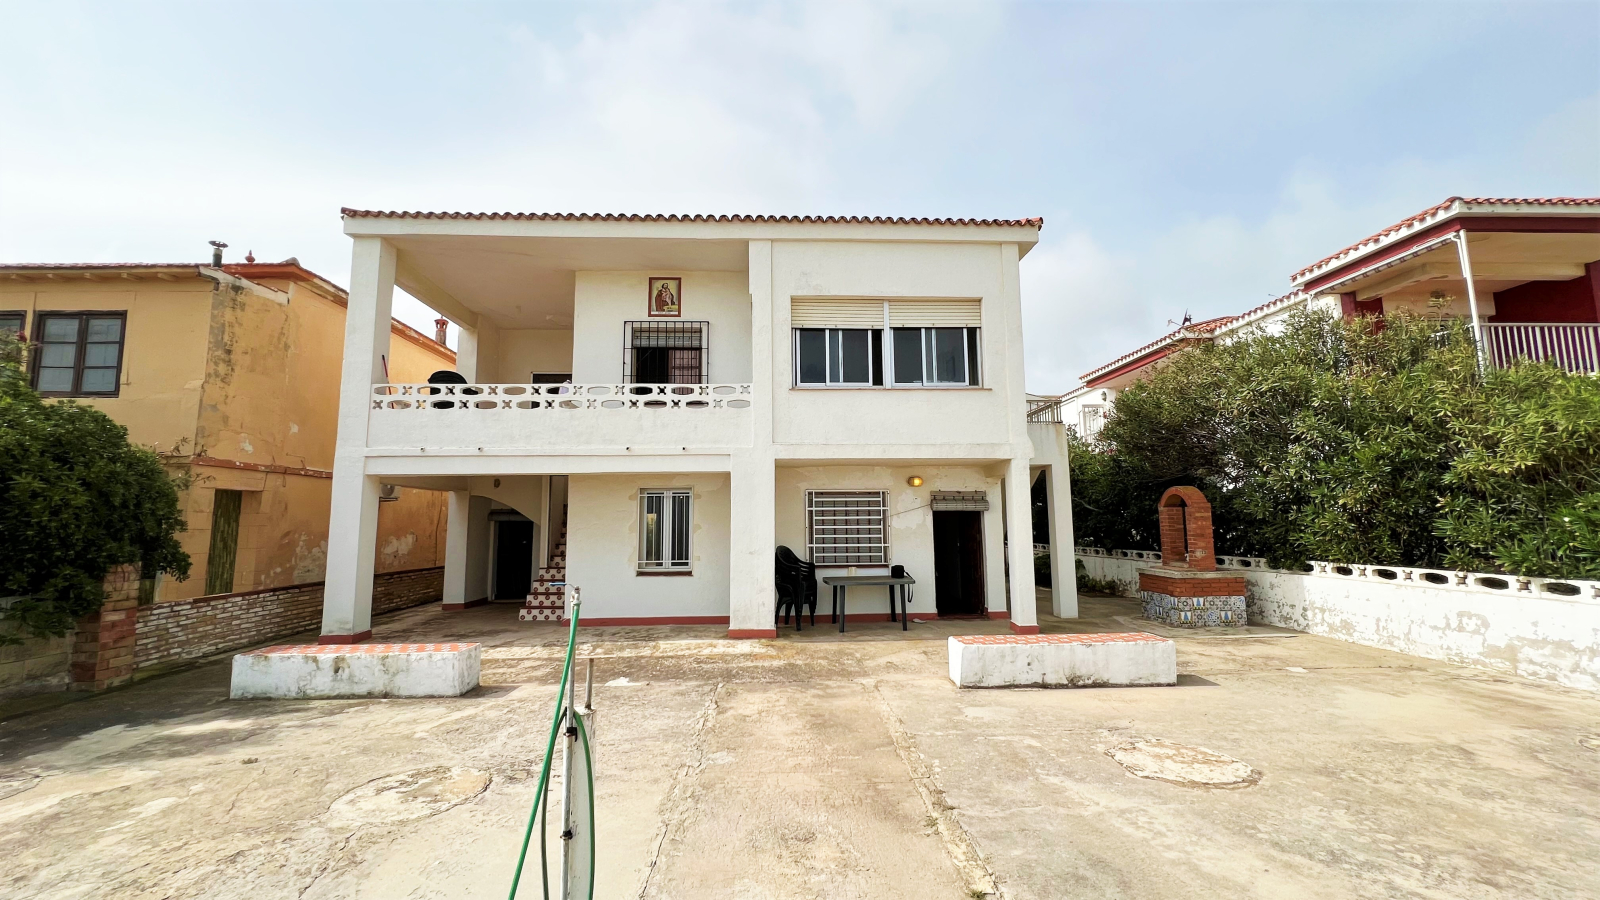 Villa in 1st sea line with beach access and 3 separate living units.